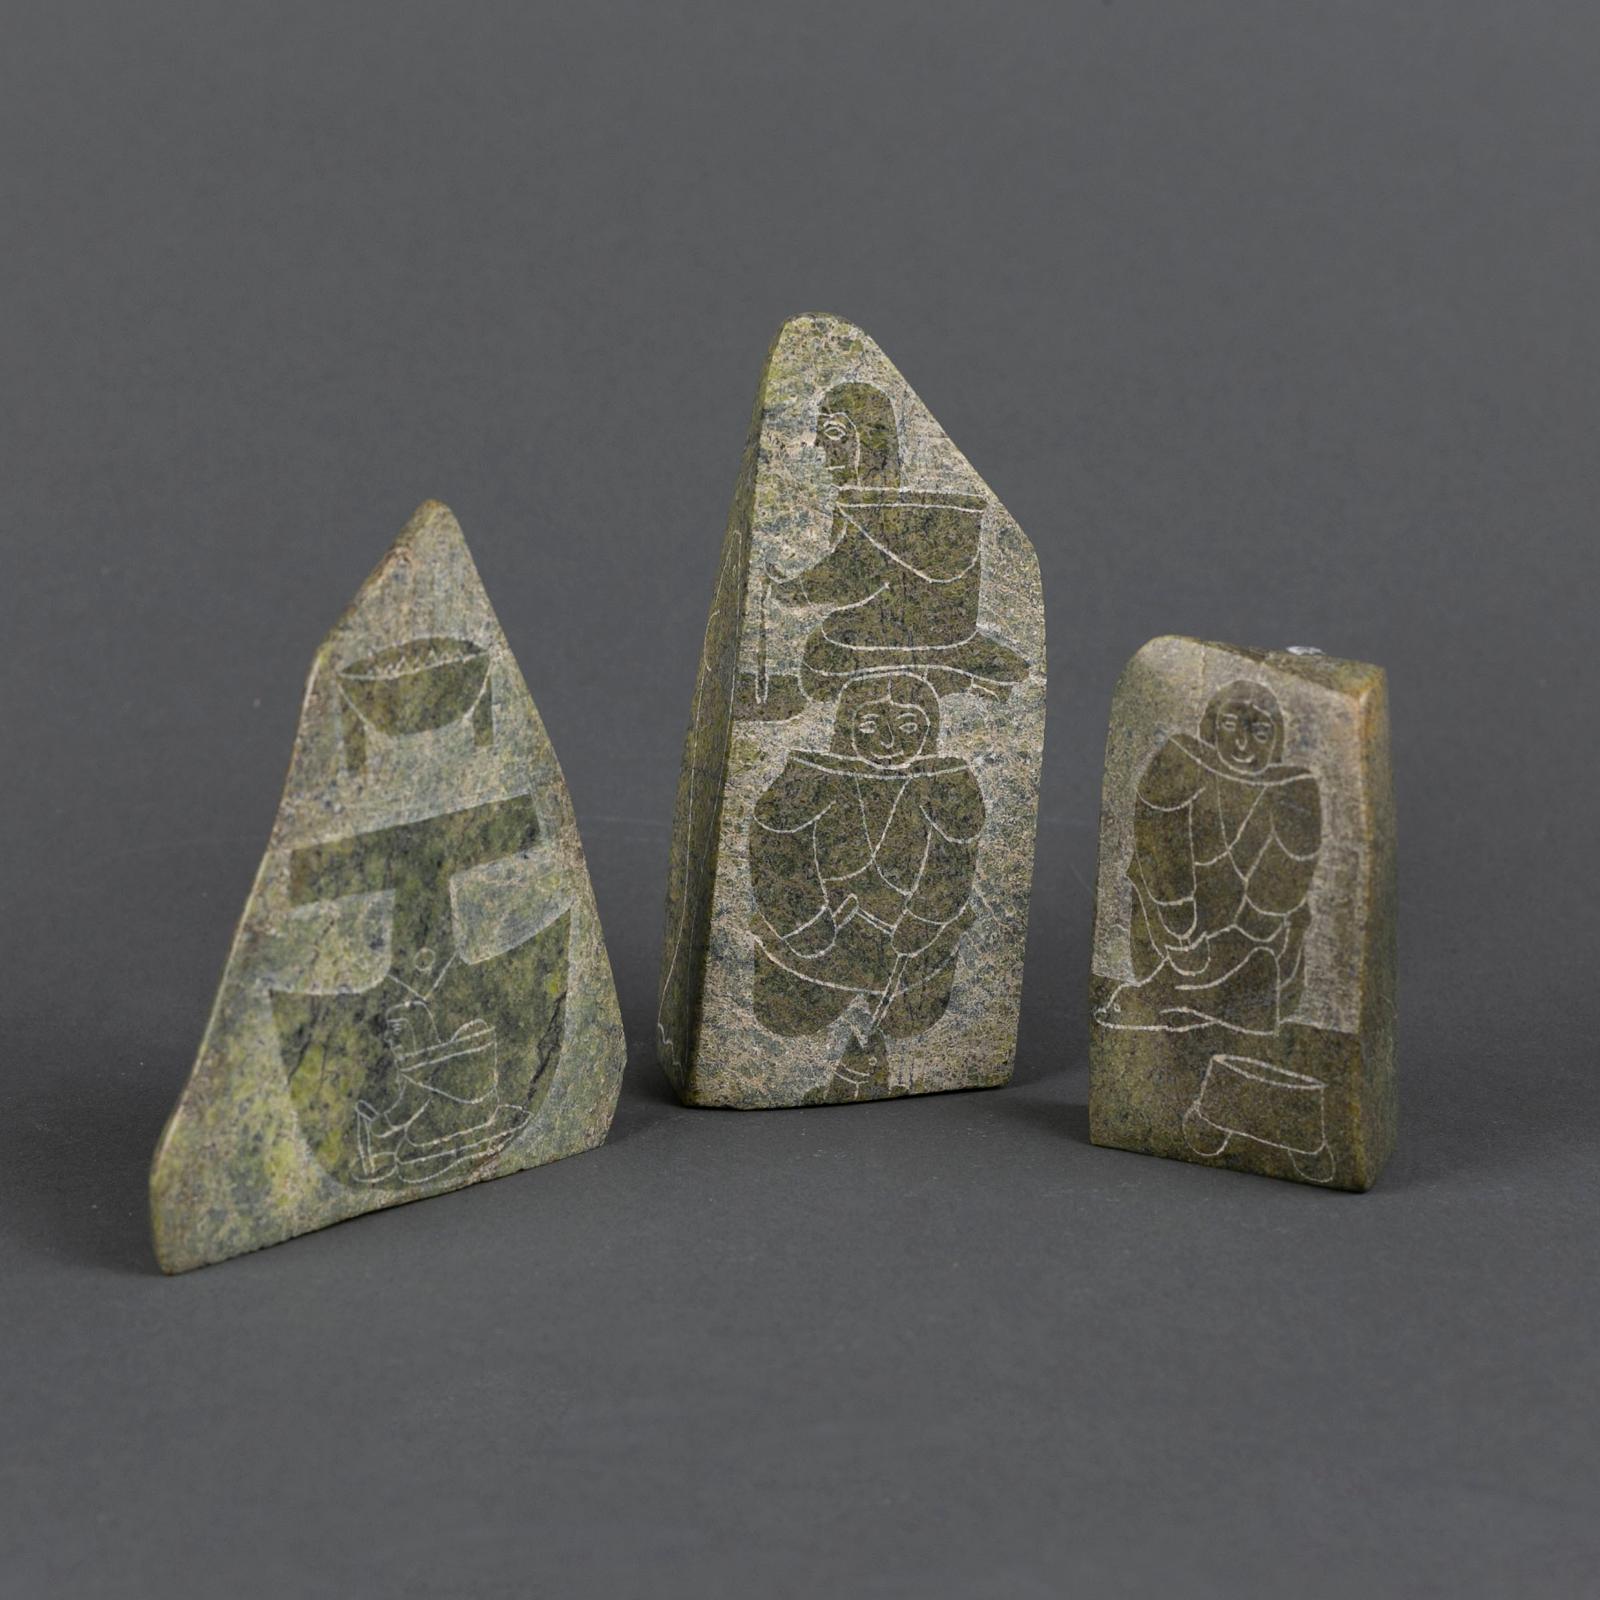 Annie Ainalik (1961) - Three Small Etchings On Soapstone